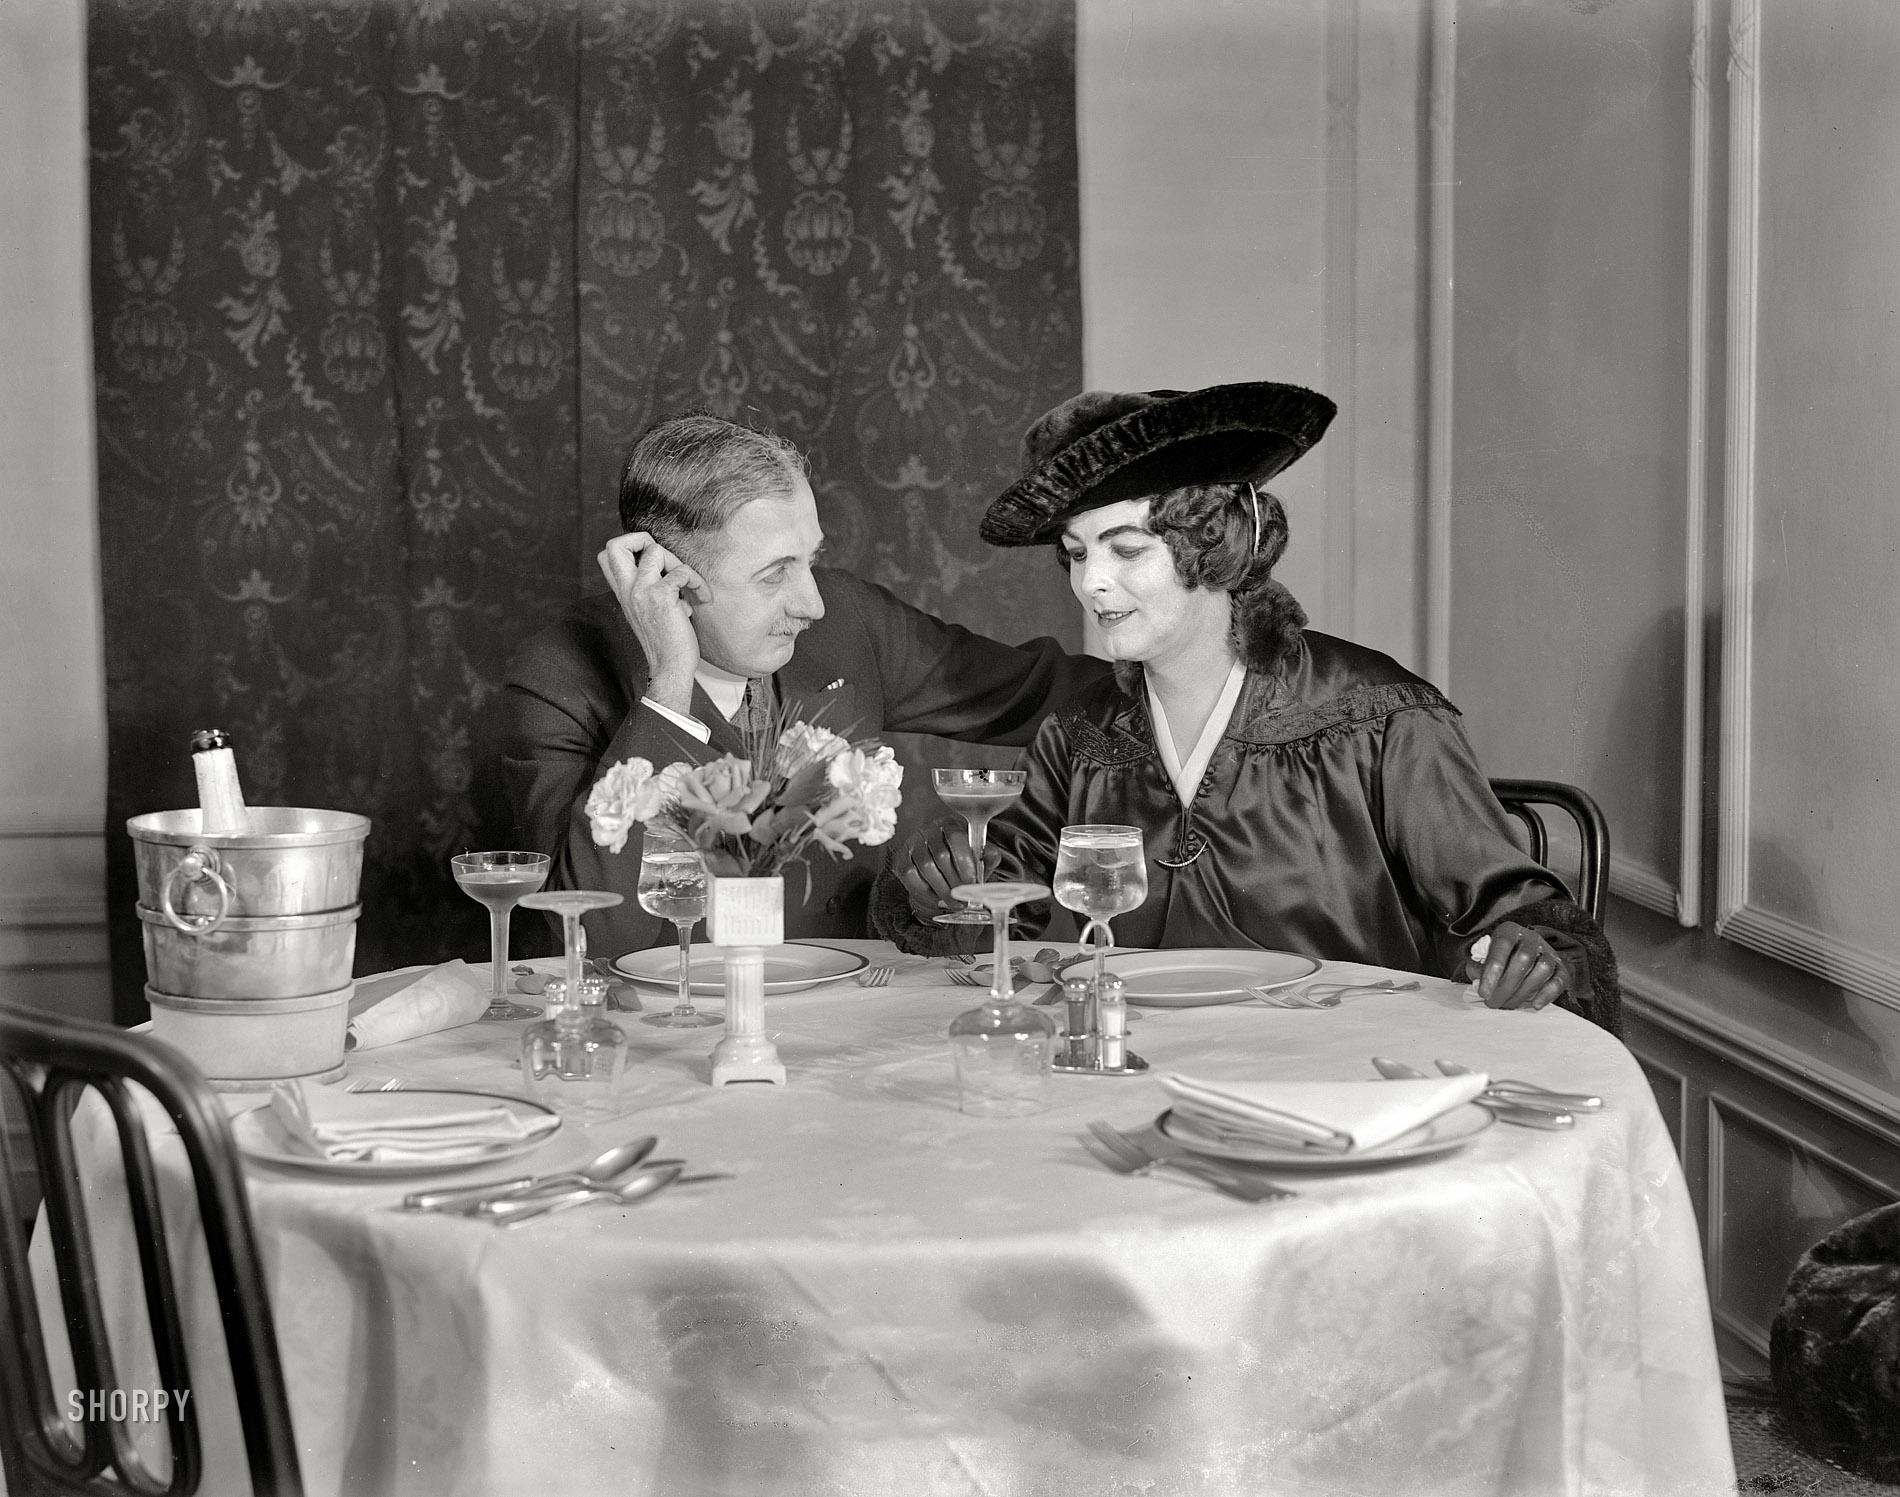 Circa 1915. "Couple at champagne supper." Anyone recognize their uncle here? 8x10 inch dry plate glass negative, Detroit Publishing Company. View full size.